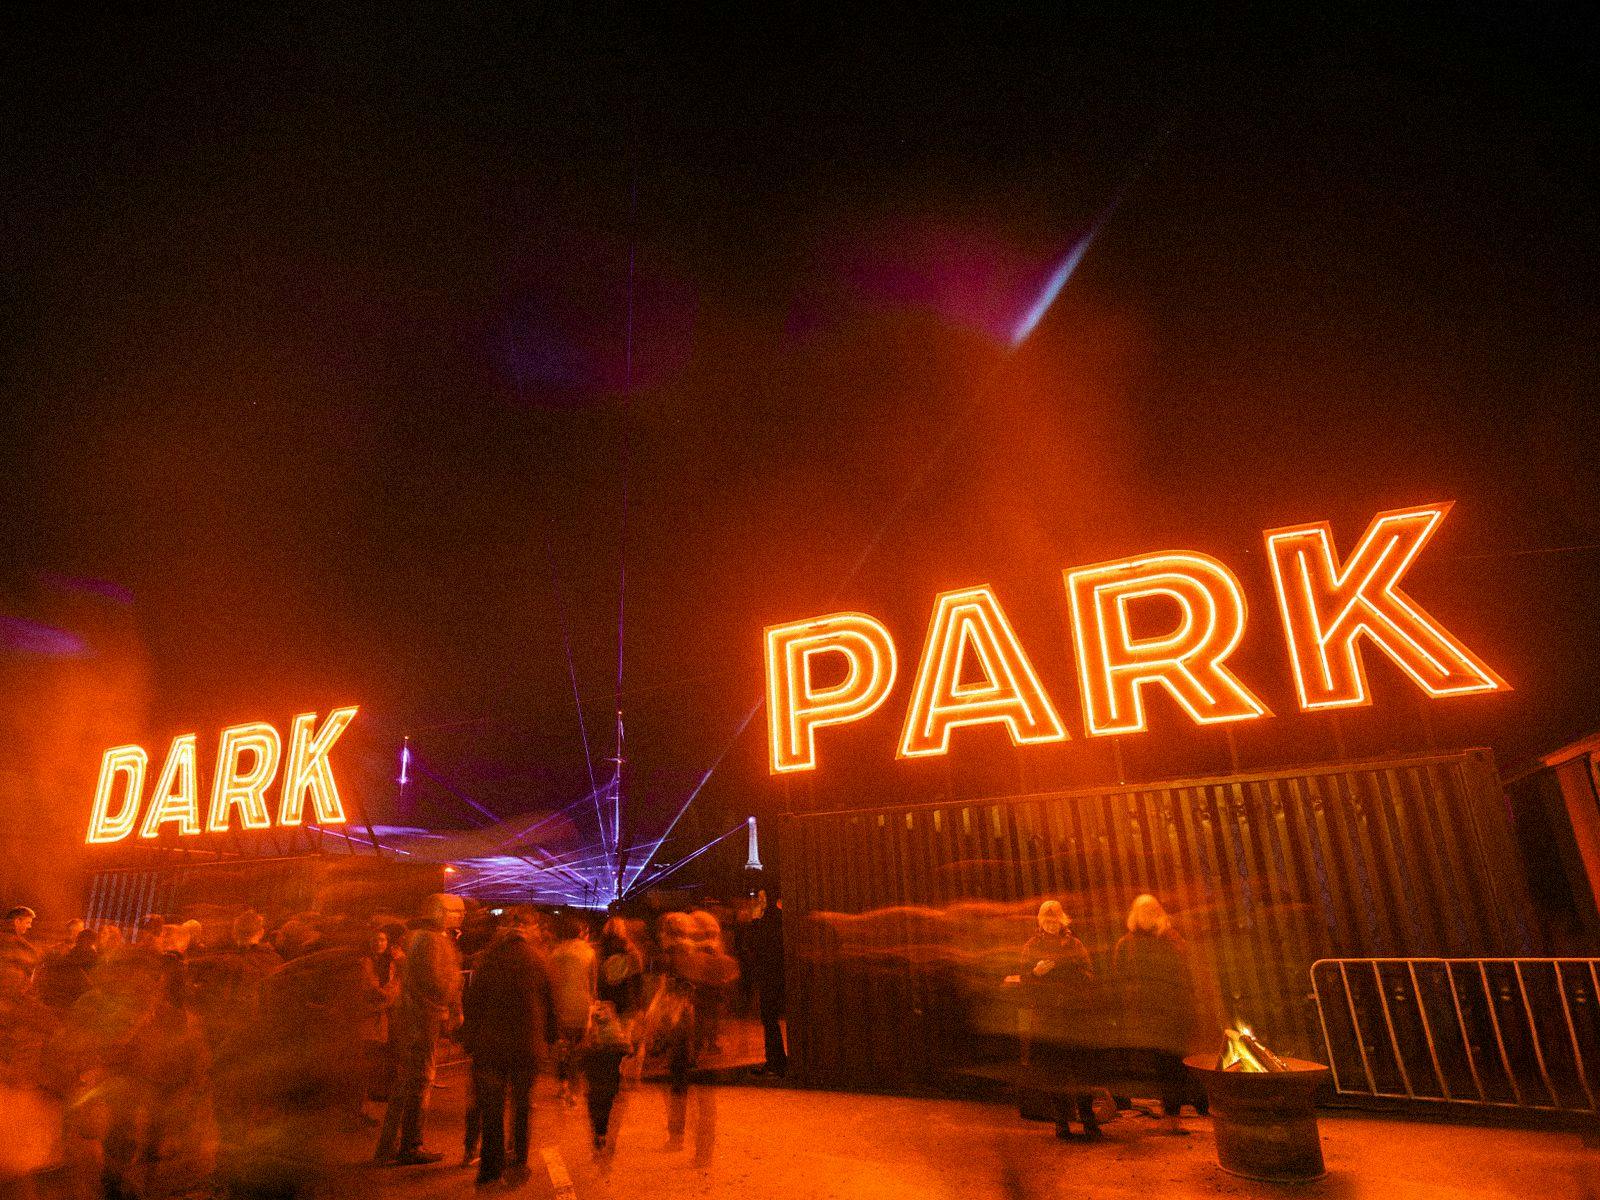 Massive neon letters spell out Dark Park, behind them a blue laser art exhibition.